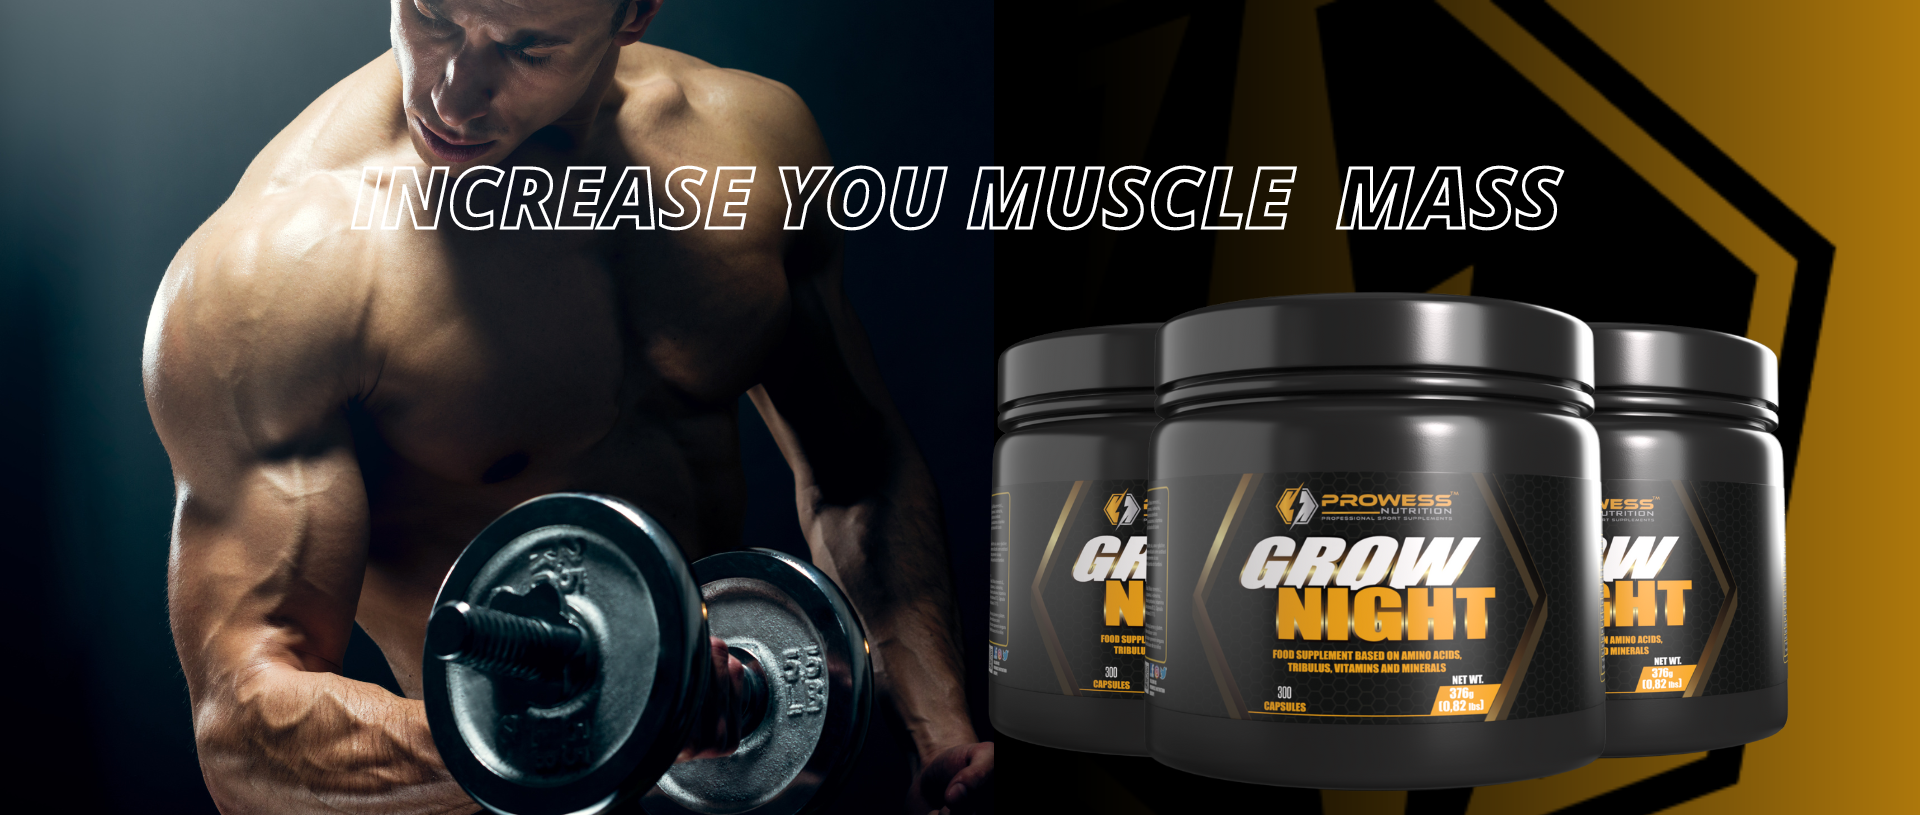 INCREASE YOU MUSCLE MASS